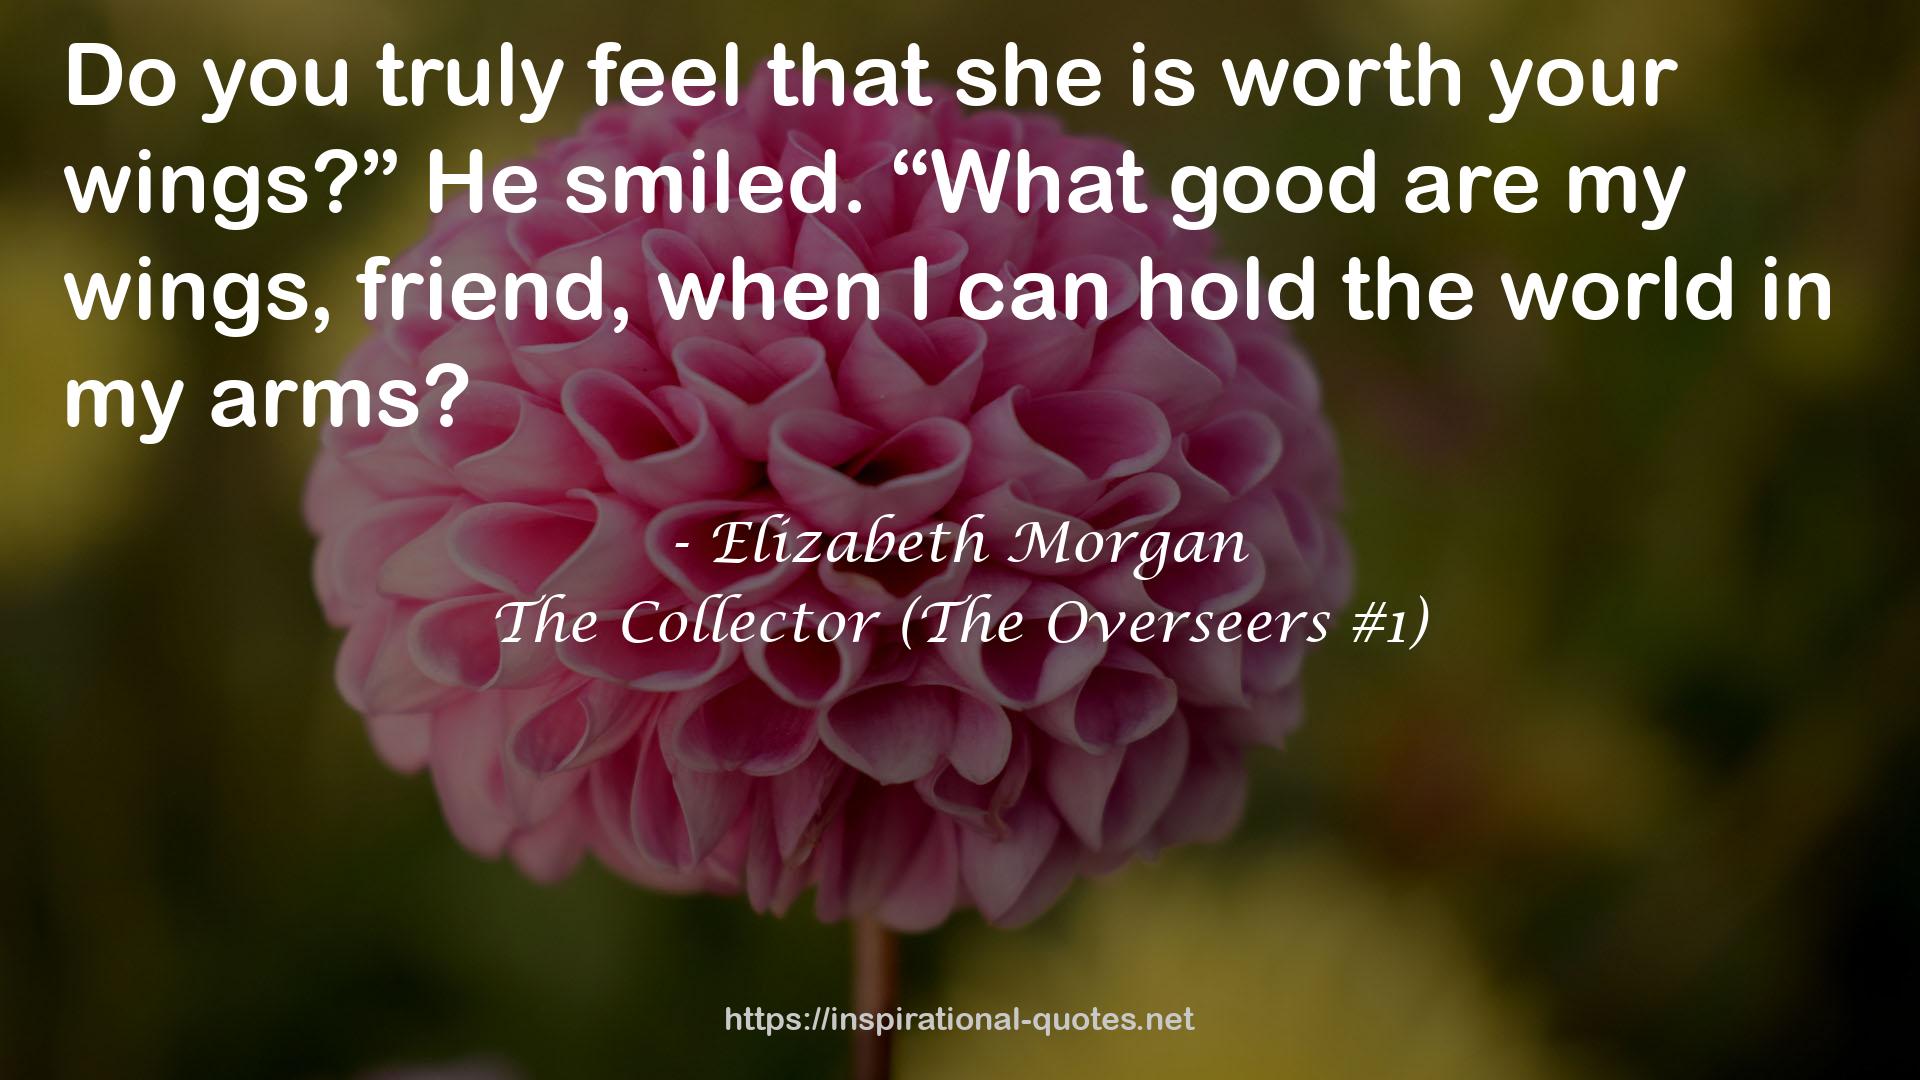 The Collector (The Overseers #1) QUOTES